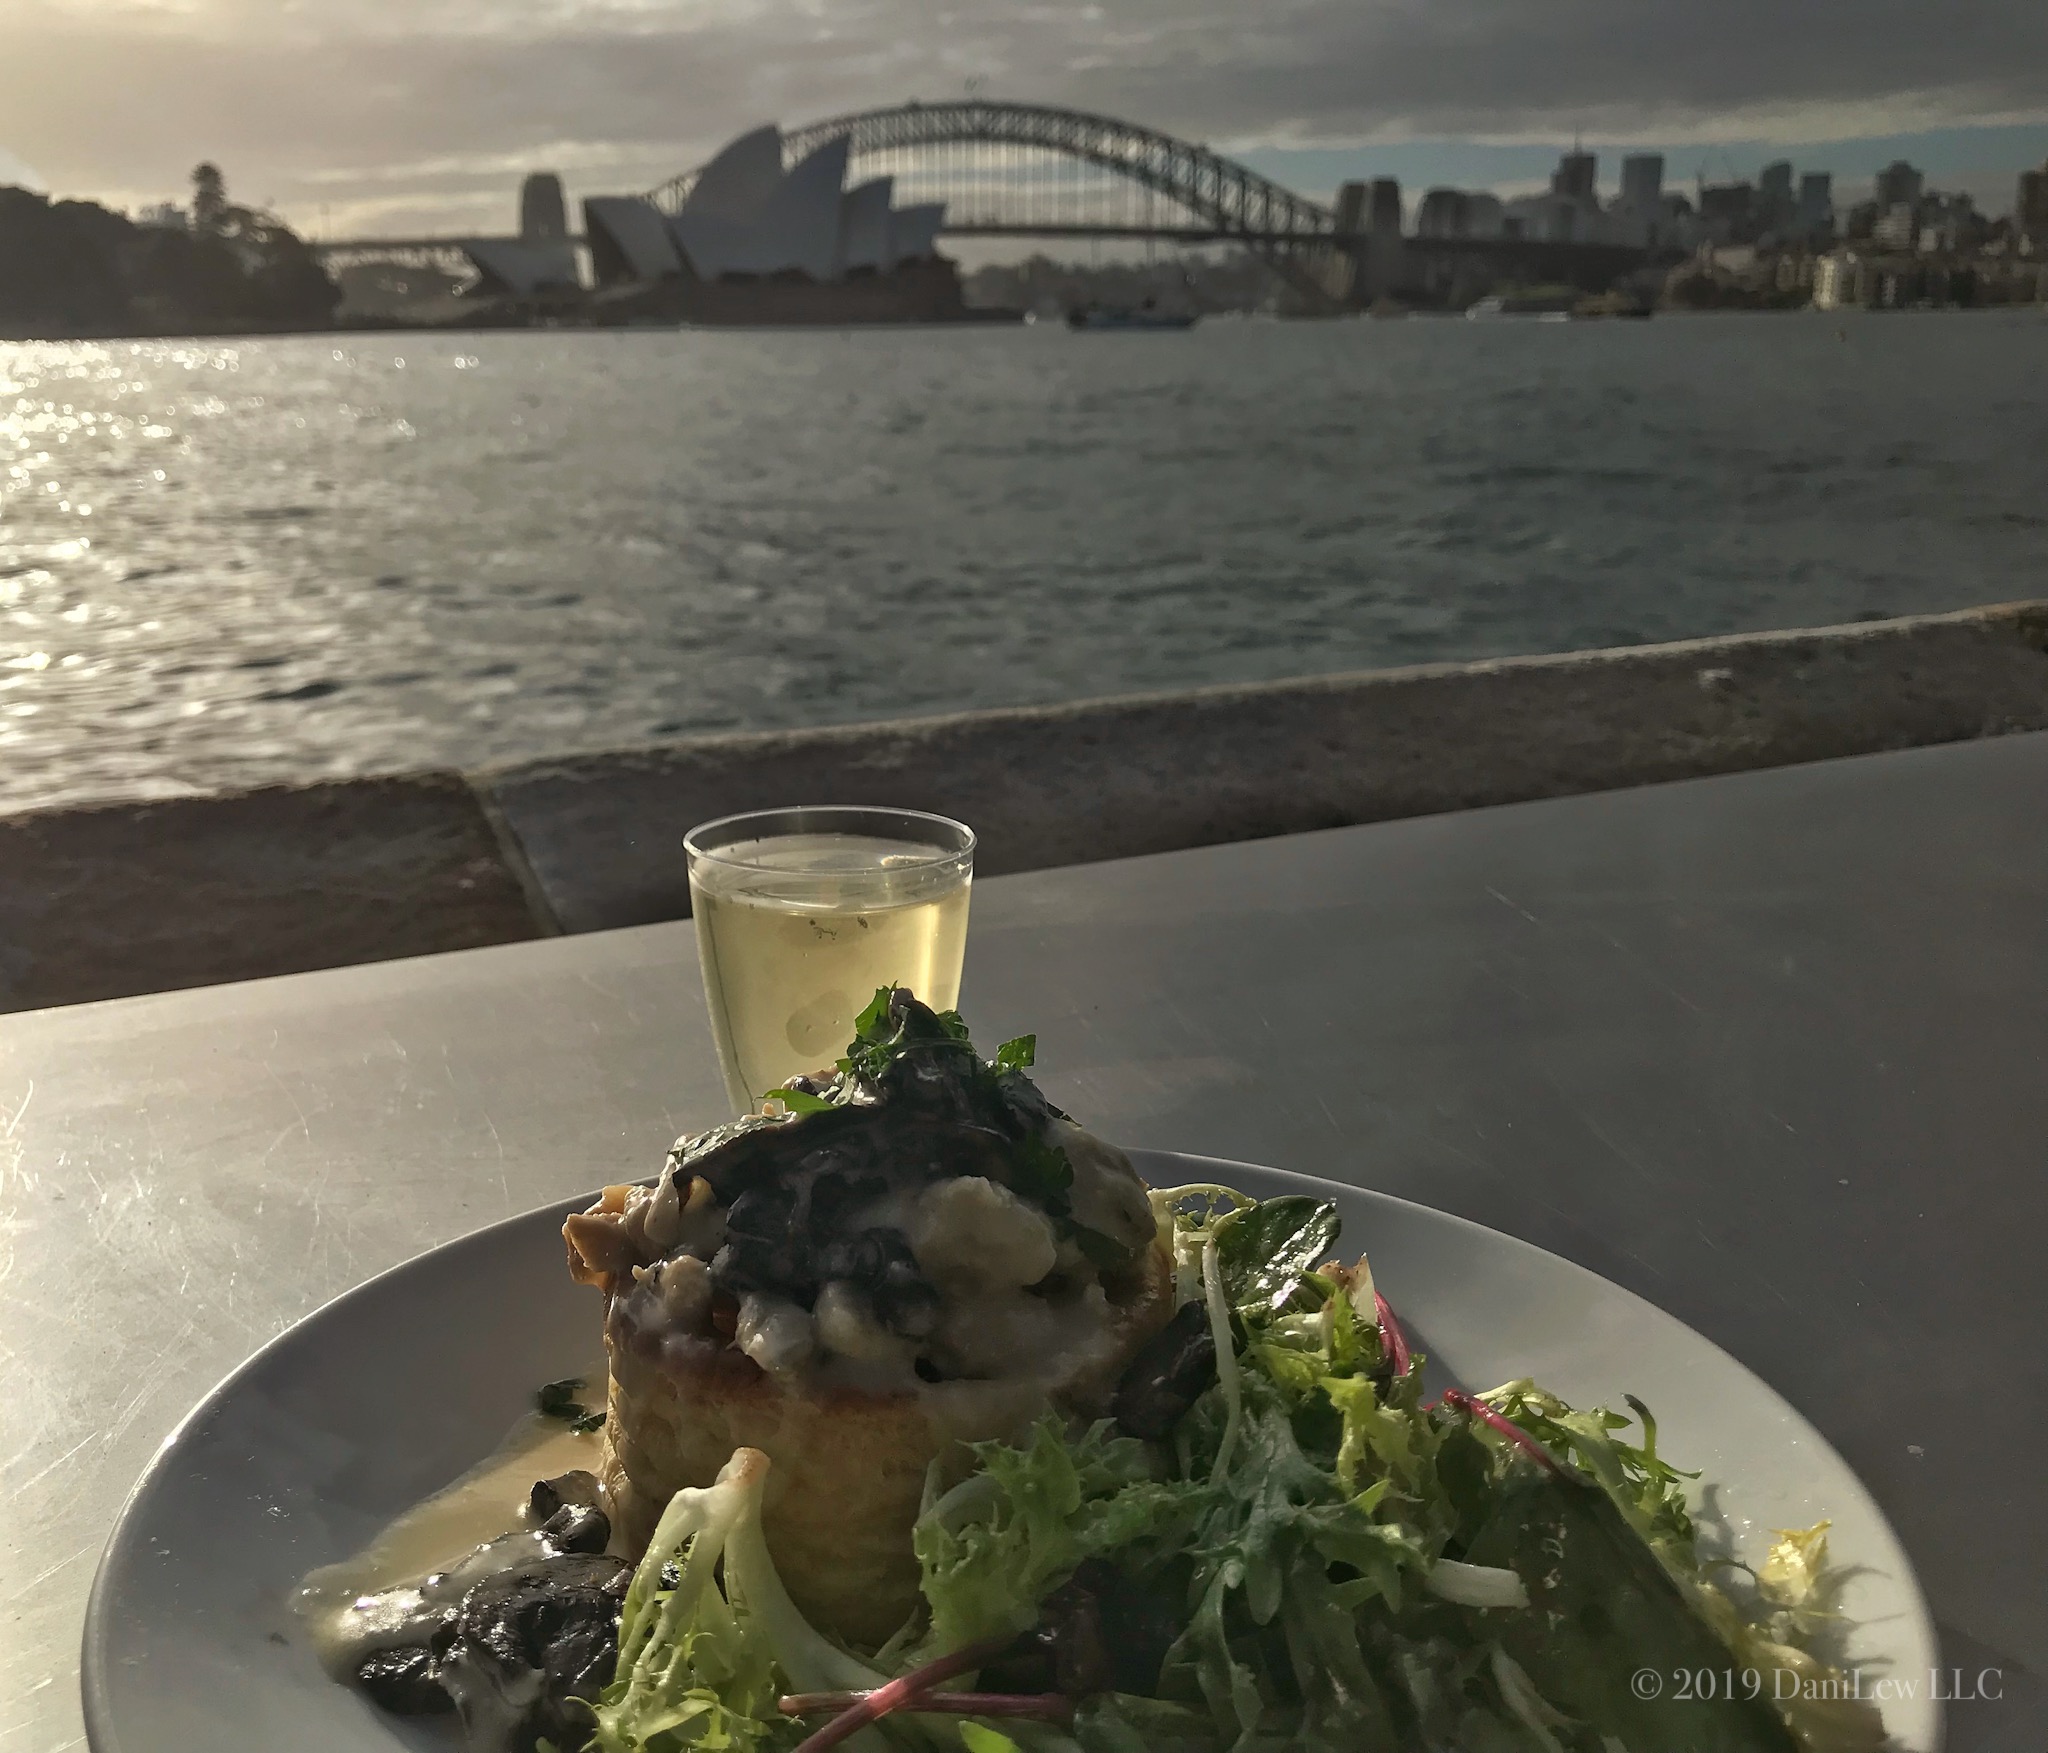 Sydney Harbor view from outdoor Handa Opera - image taken with an iPhone 7